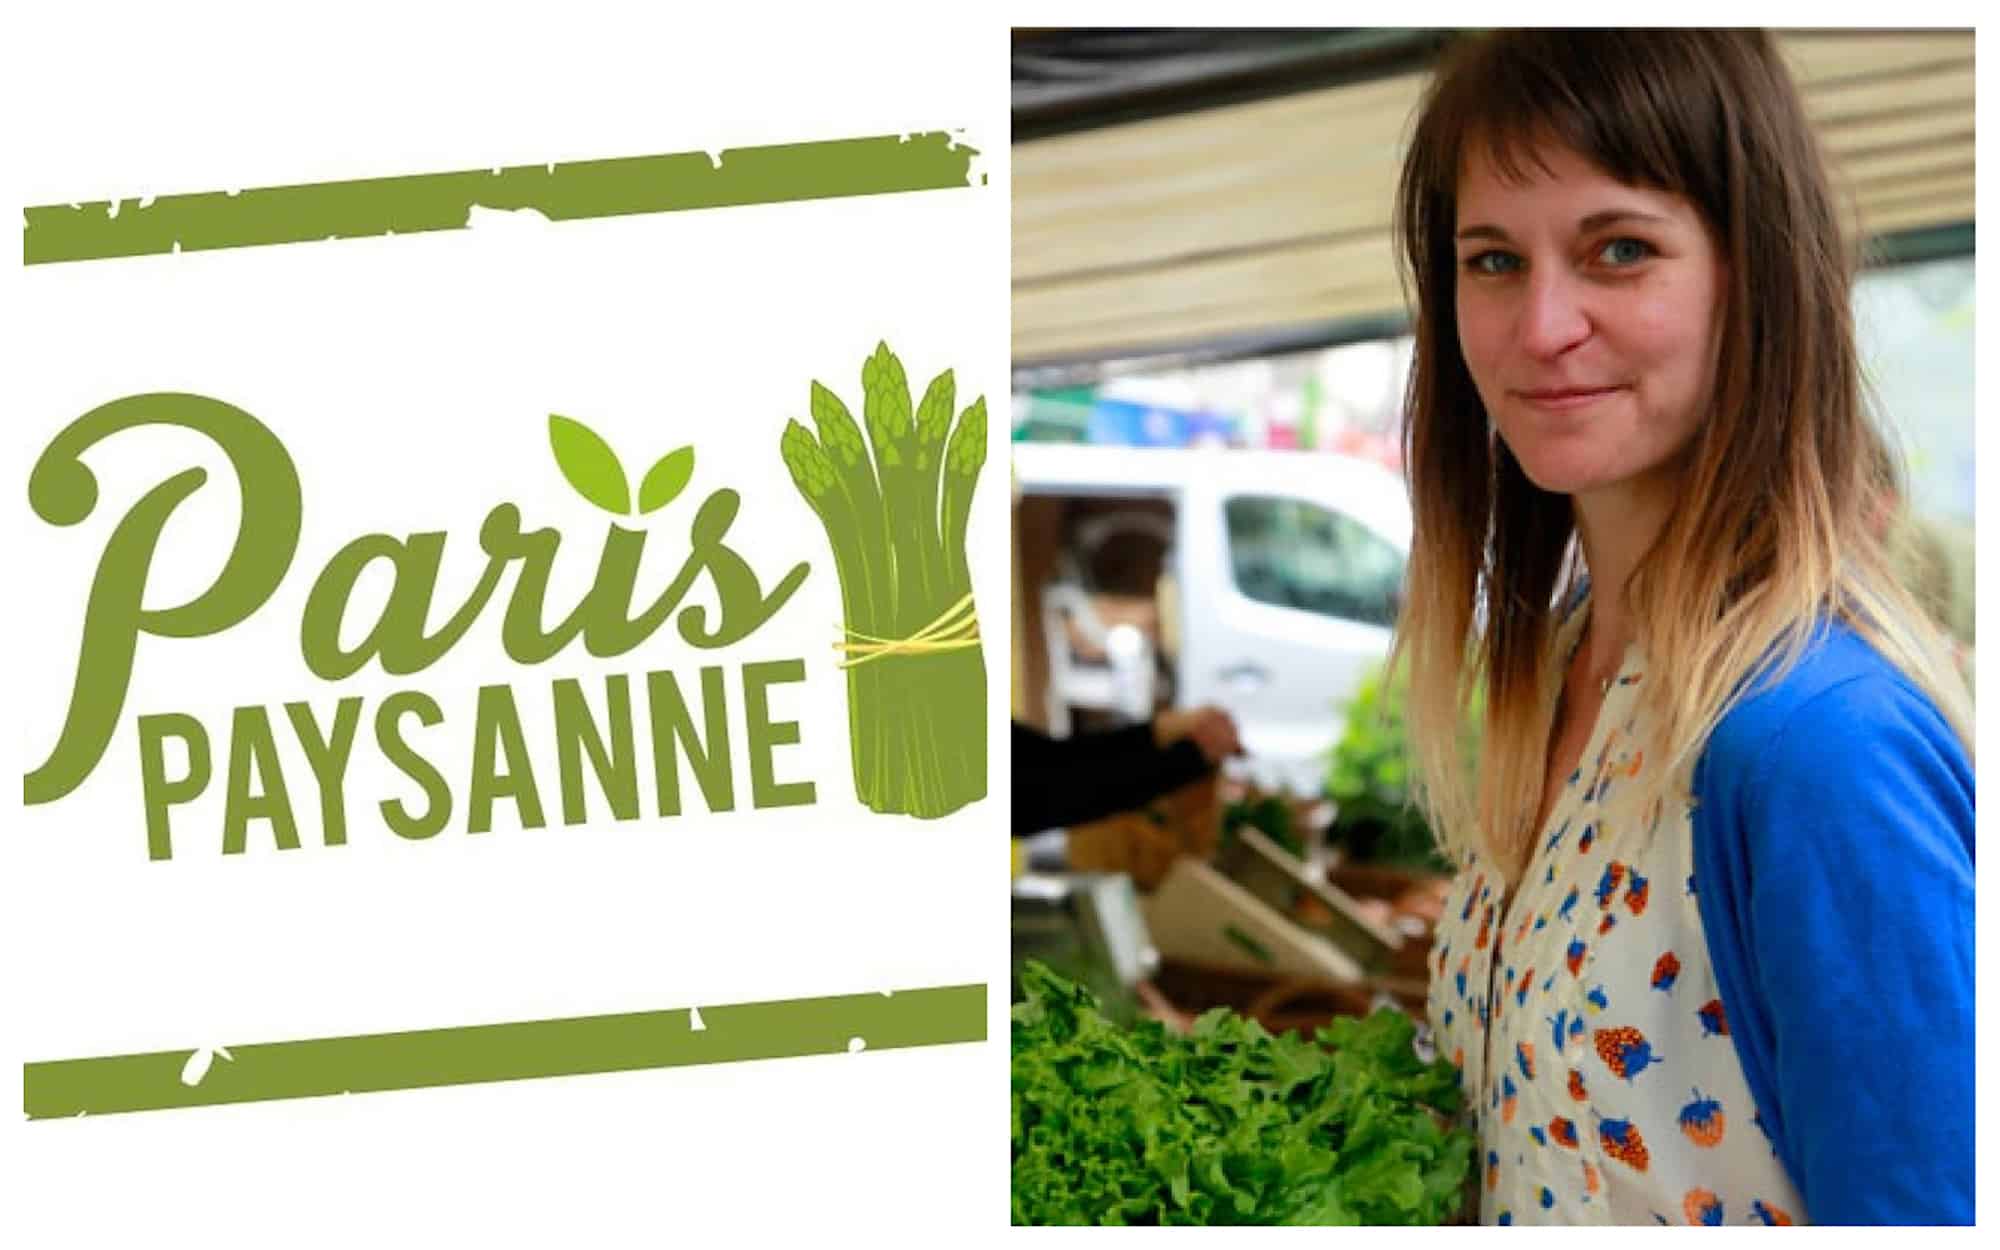 HiP Paris Blog rounds up the best Paris podcasts including Emily Dilling's Paris Paysanne show about eating in Paris. A poster for her shows (left) and a portrait of Emily at a market (right).